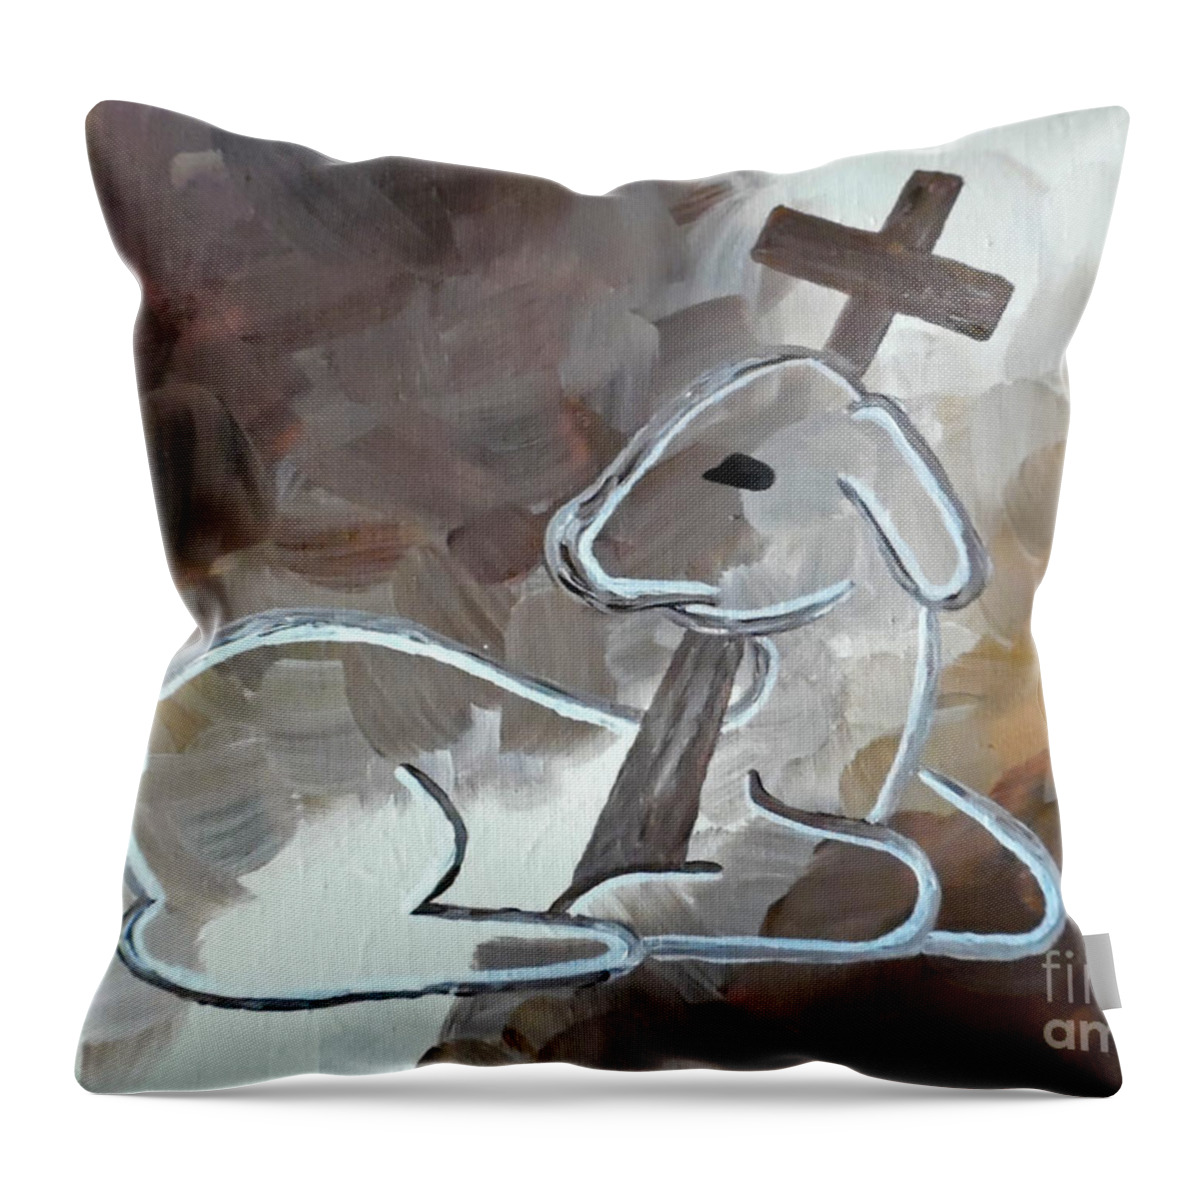 Lamb Religious Throw Pillow featuring the painting Spotless Lamb by Jilian Cramb - AMothersFineArt